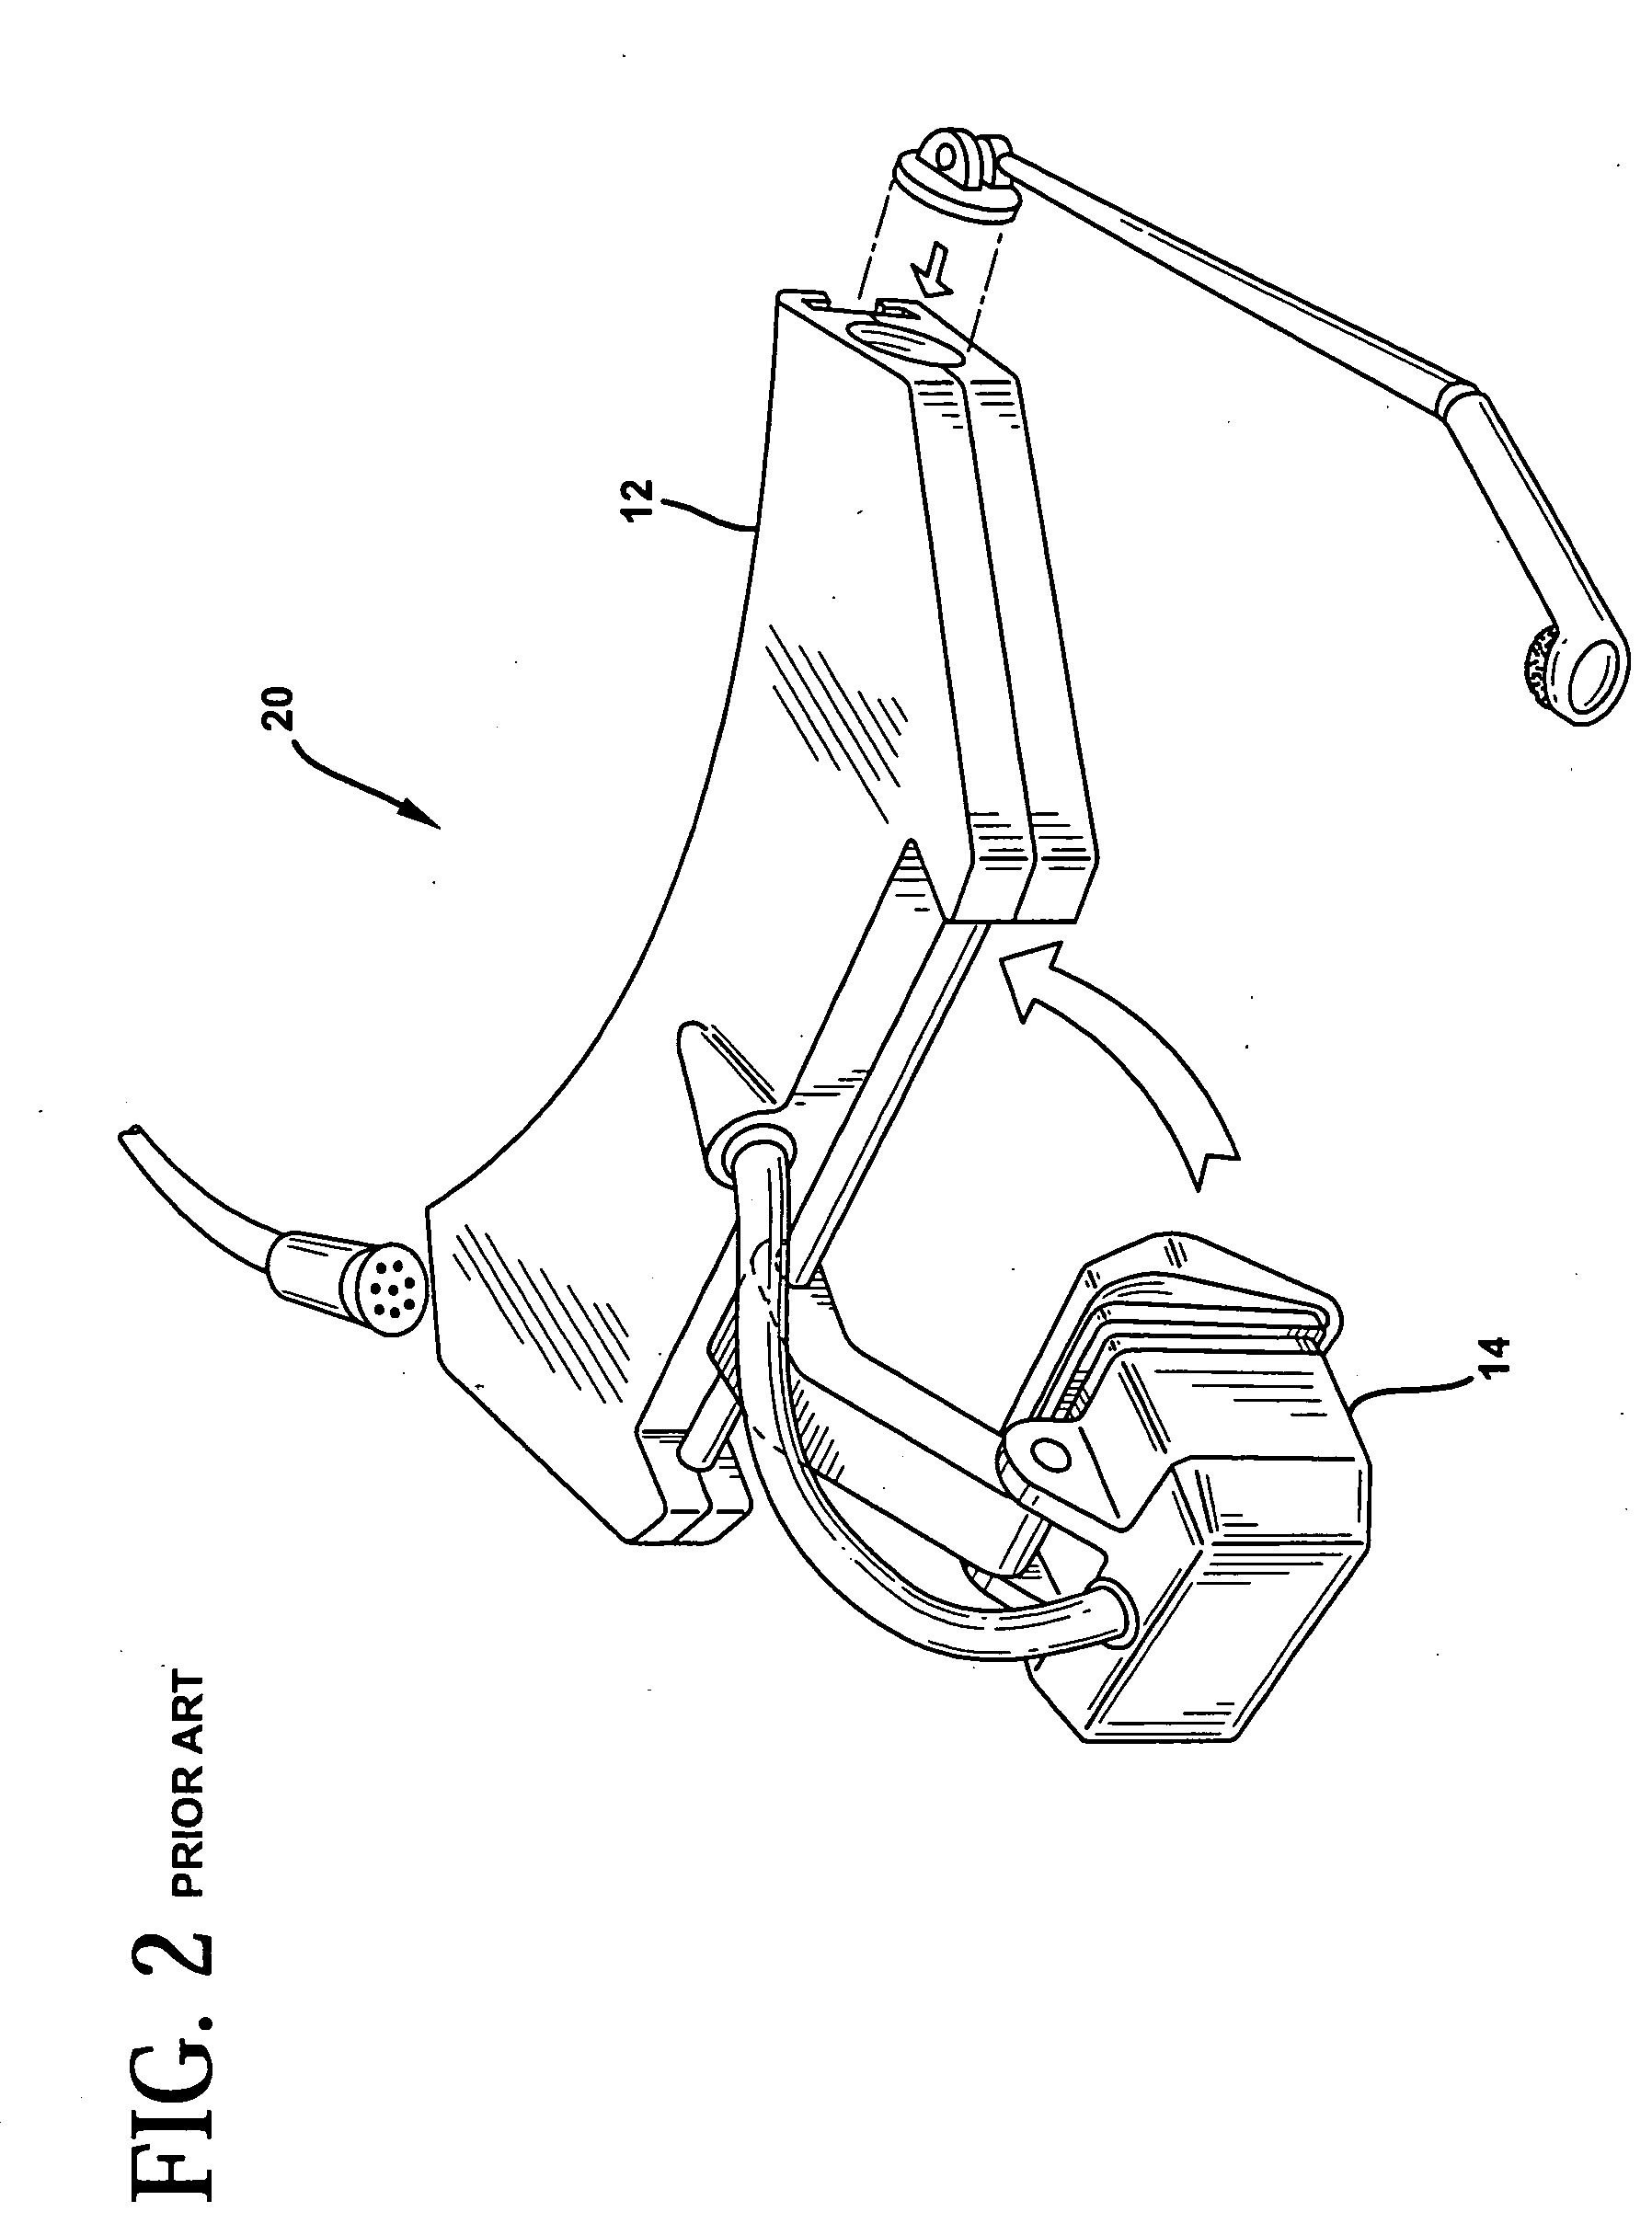 Compact optical system and packaging for head mounted display